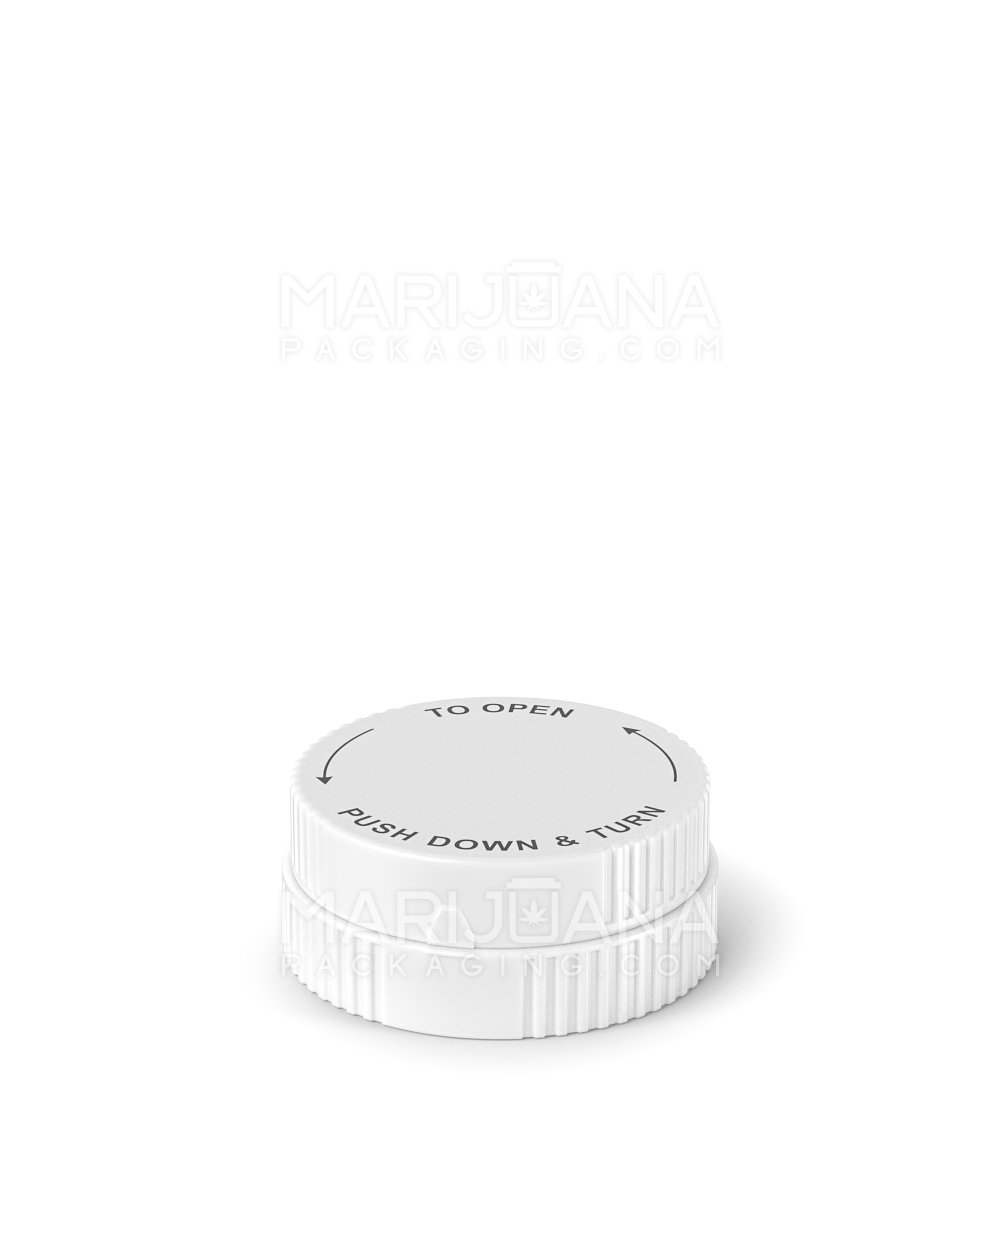 Child Resistant | Push & Turn Vial with Grinder Cap | 60dr - White Plastic - 100 Count - 9